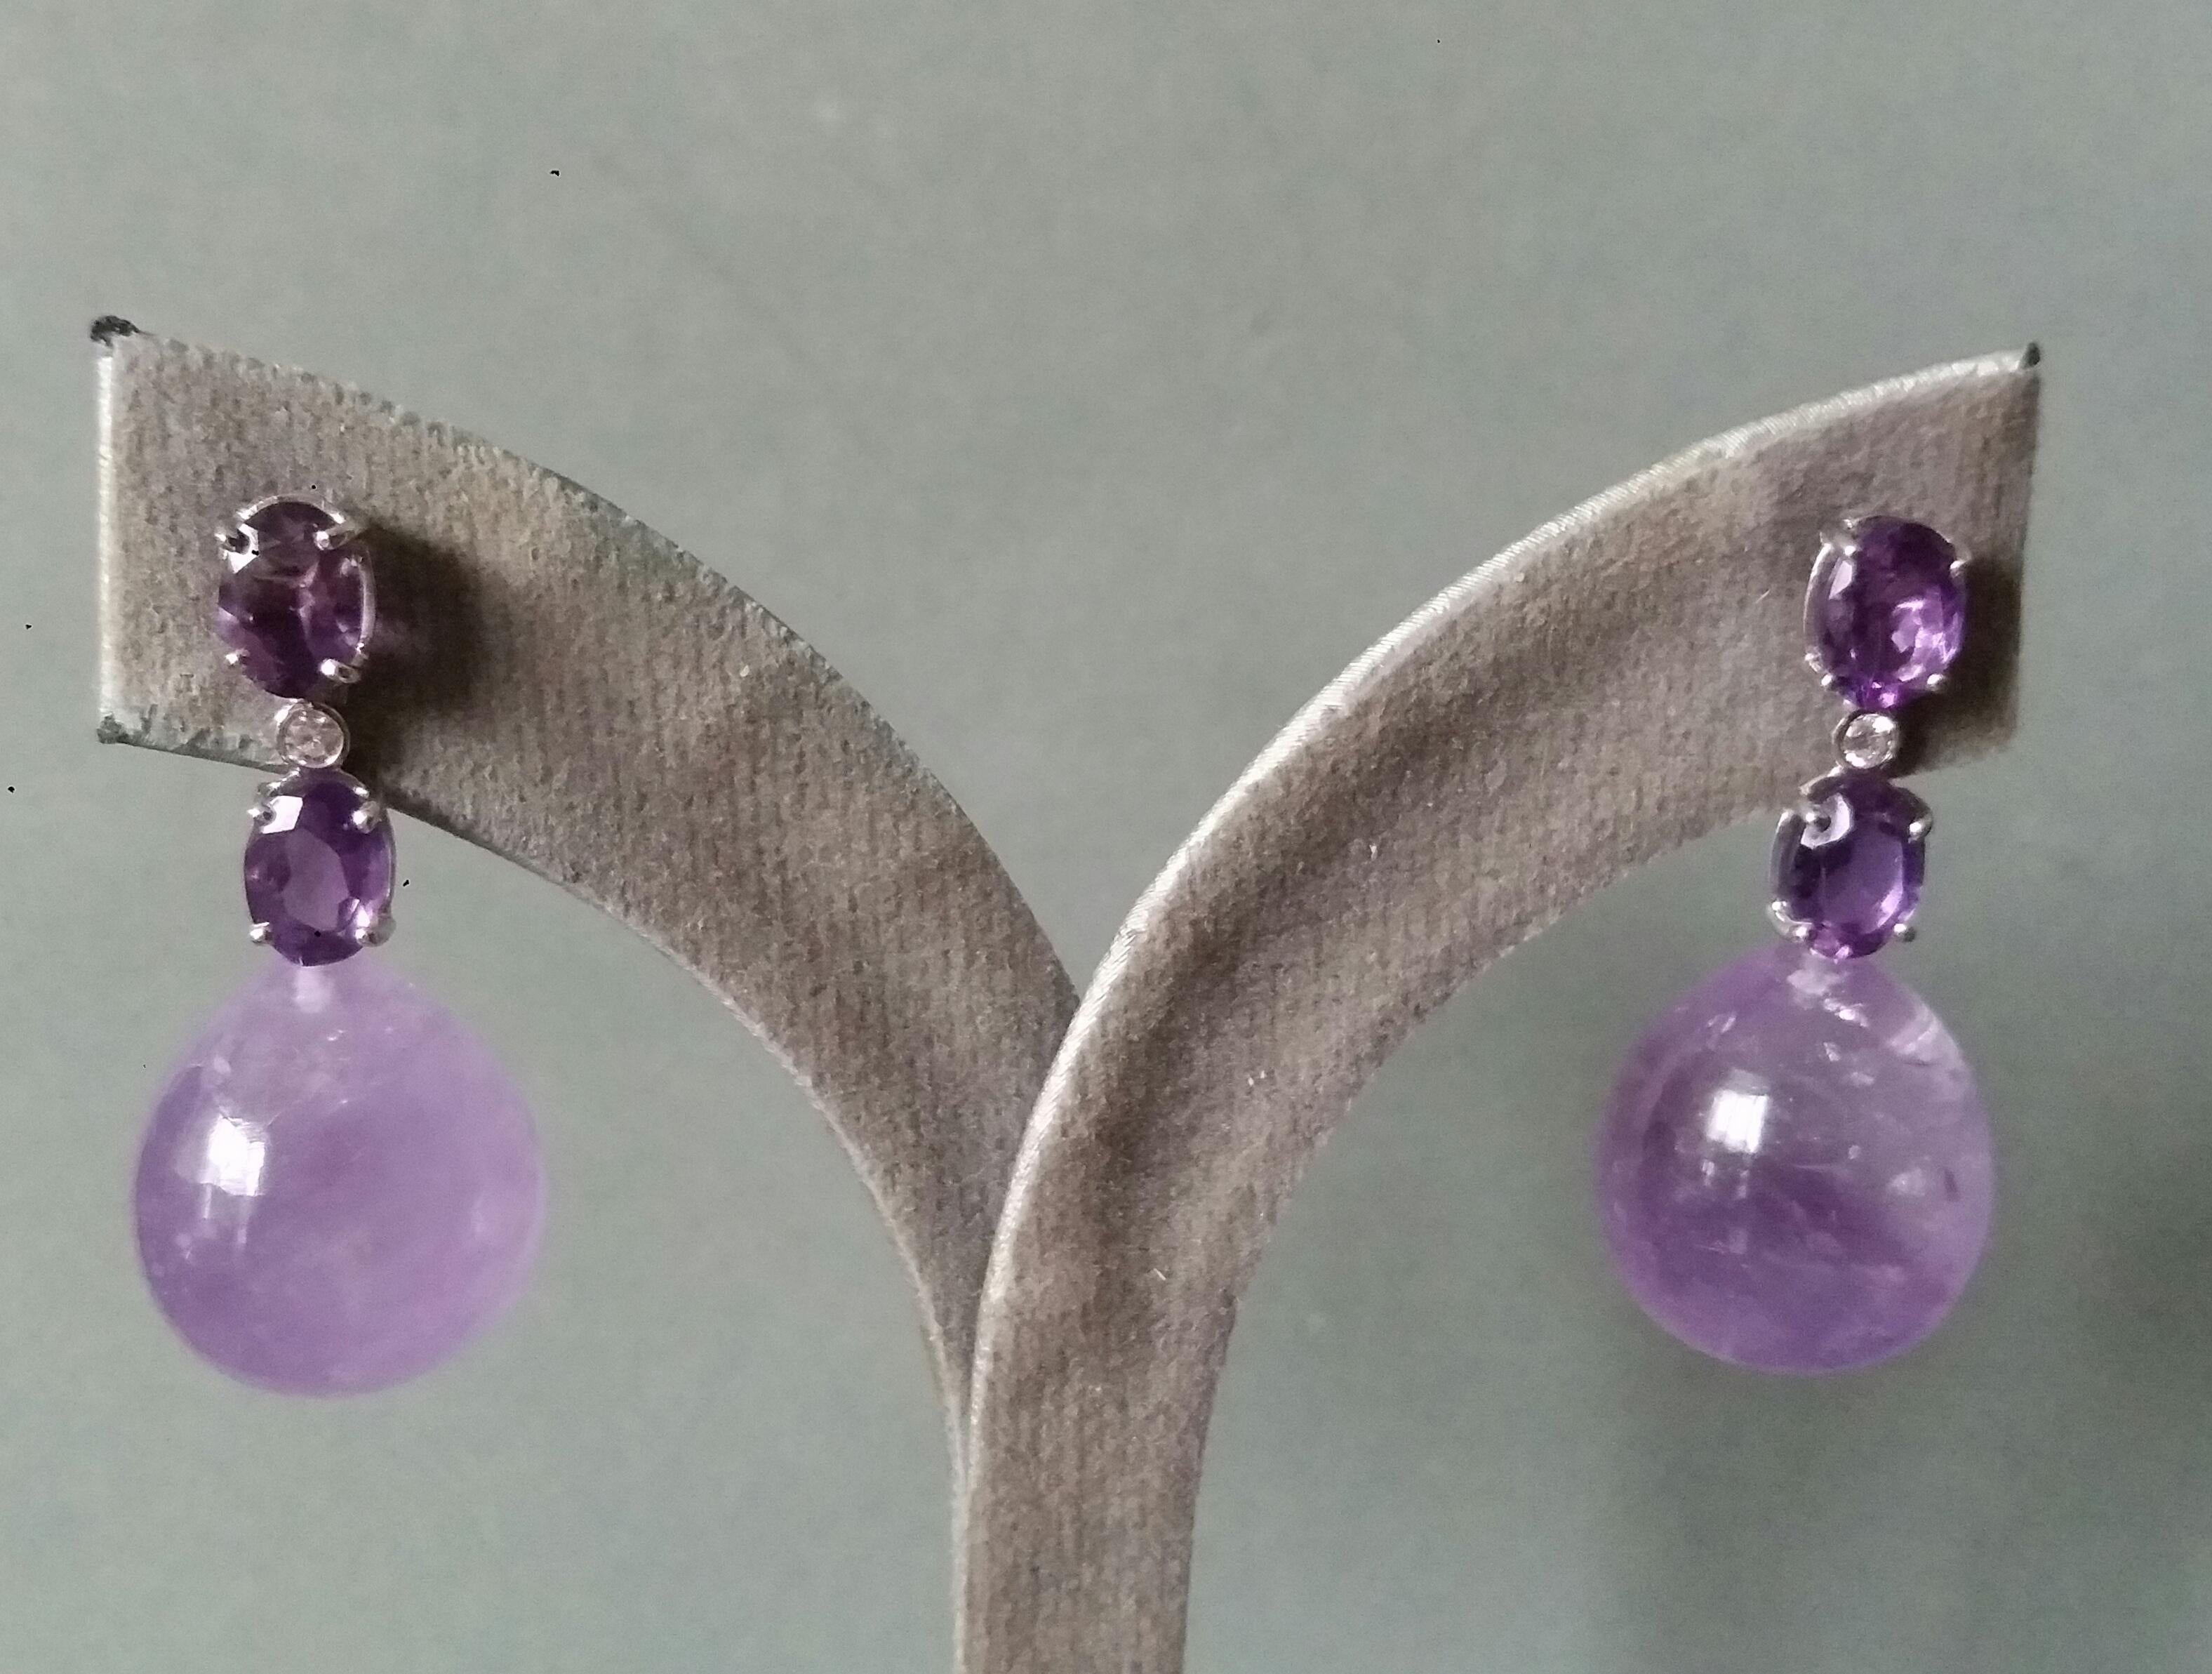 2 Oval Shape Faceted Amethyst Gold Diamonds 2 Plain Round Amethyst Drop Earrings For Sale 7